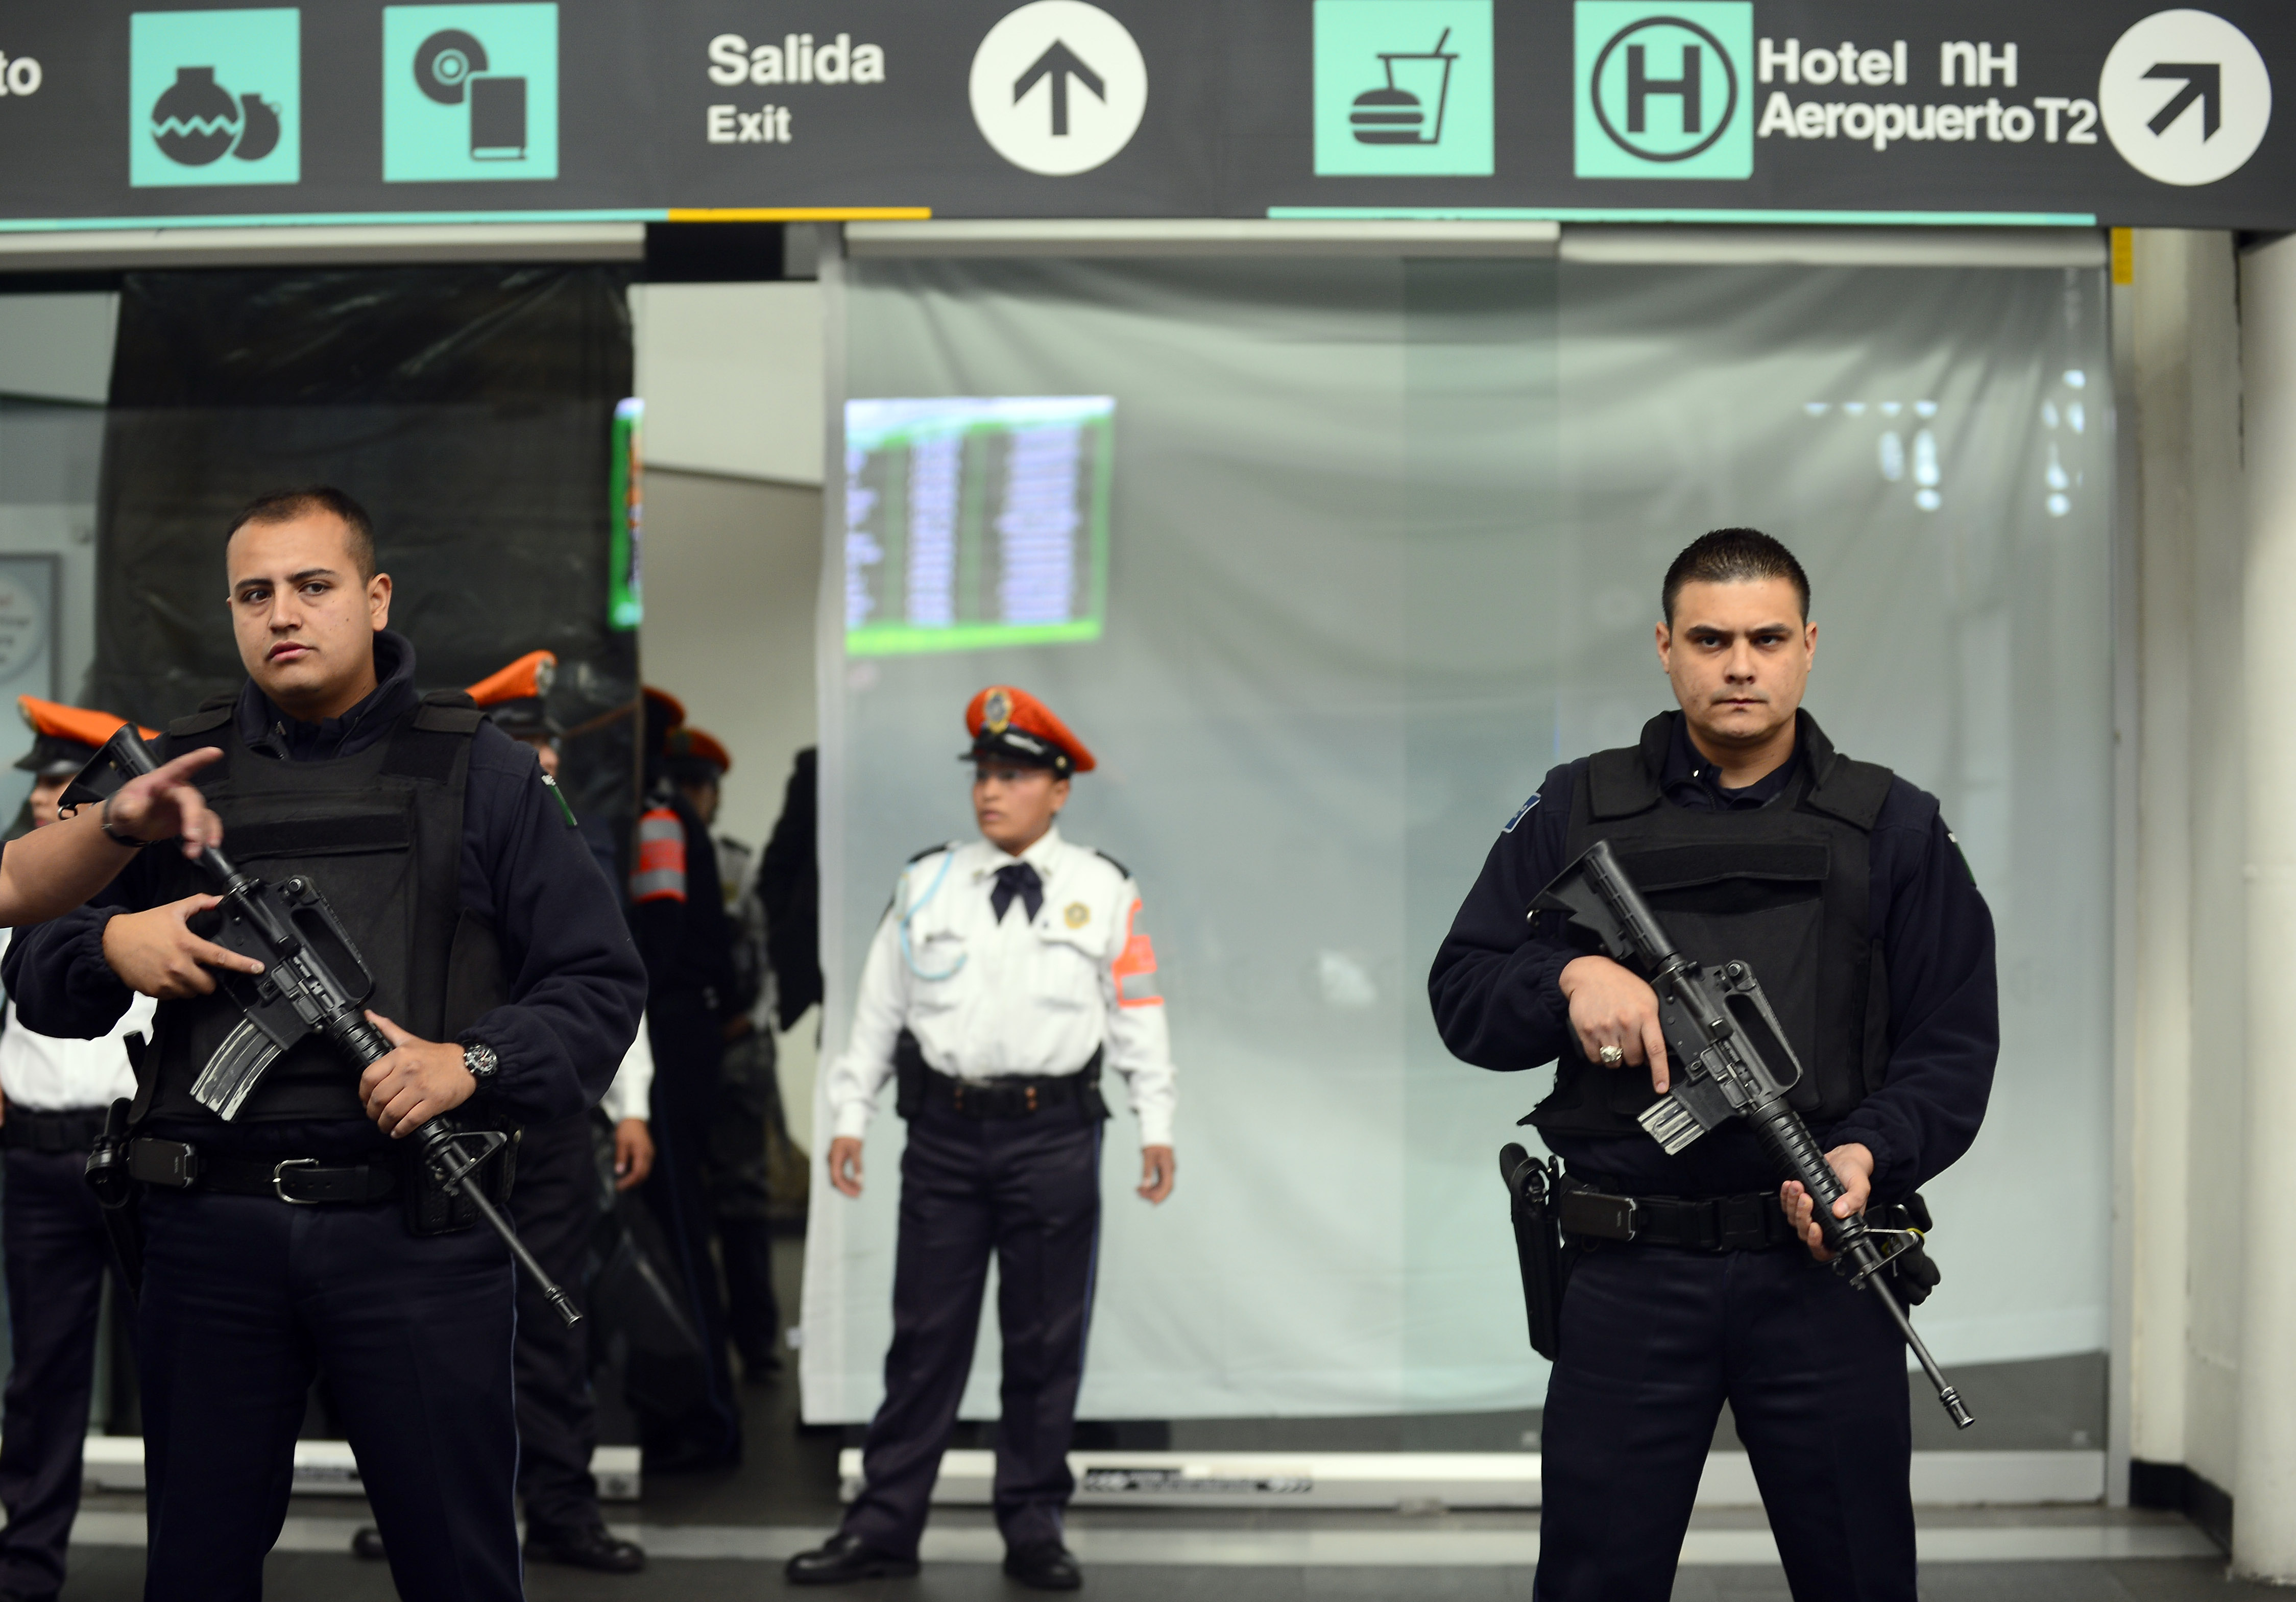 Federal Police officers stand guard at an entrance near the fast-food area of Benito Juarez international airport Terminal 2, in Mexico City where two police officers were shot dead and a third was wounded on June 25, 2012. Airport spokesman Jorge Andres Gomez said authorities are going through the security cameras to know the exact events of the shooting. AFP PHOTO/Alfredo ESTRELLAALFREDO ESTRELLA/AFP/GettyImages